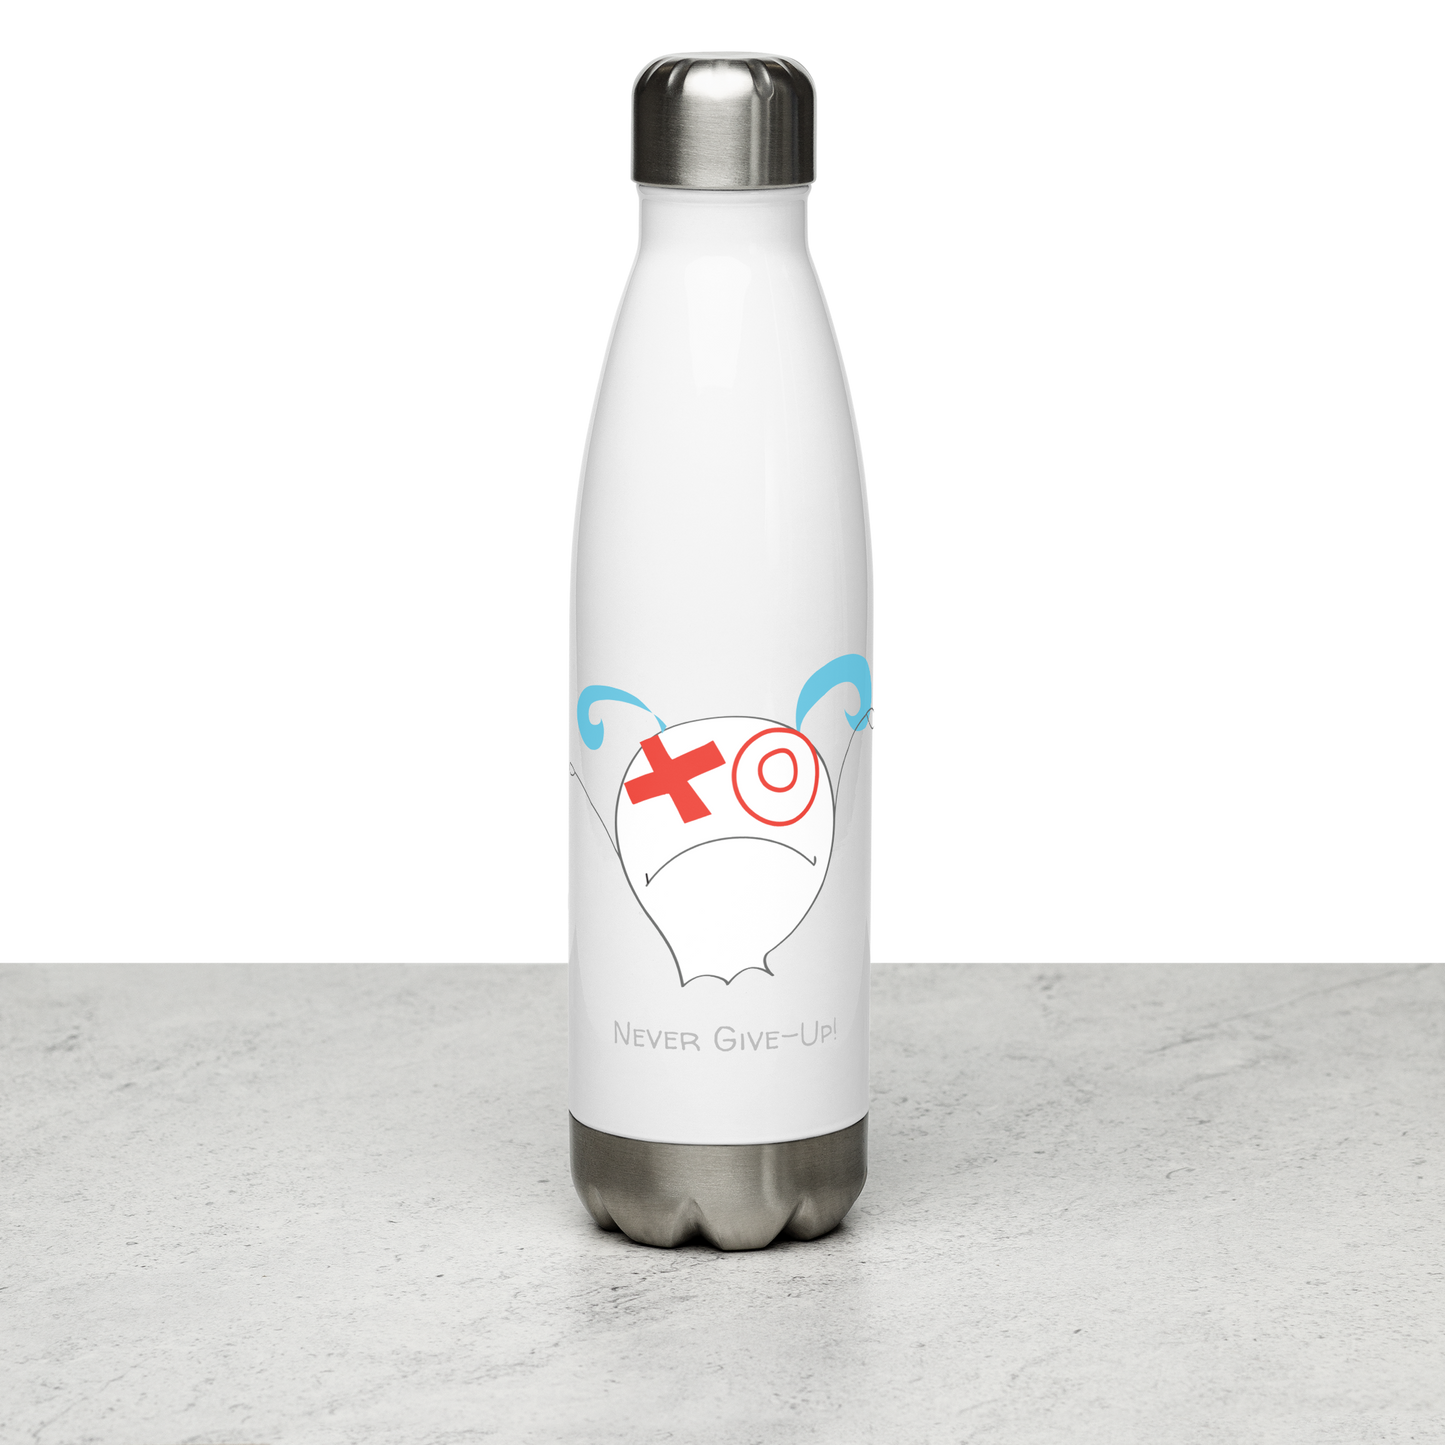 Never Give-Up! The Ghobbuls Stainless Steel Water Bottle